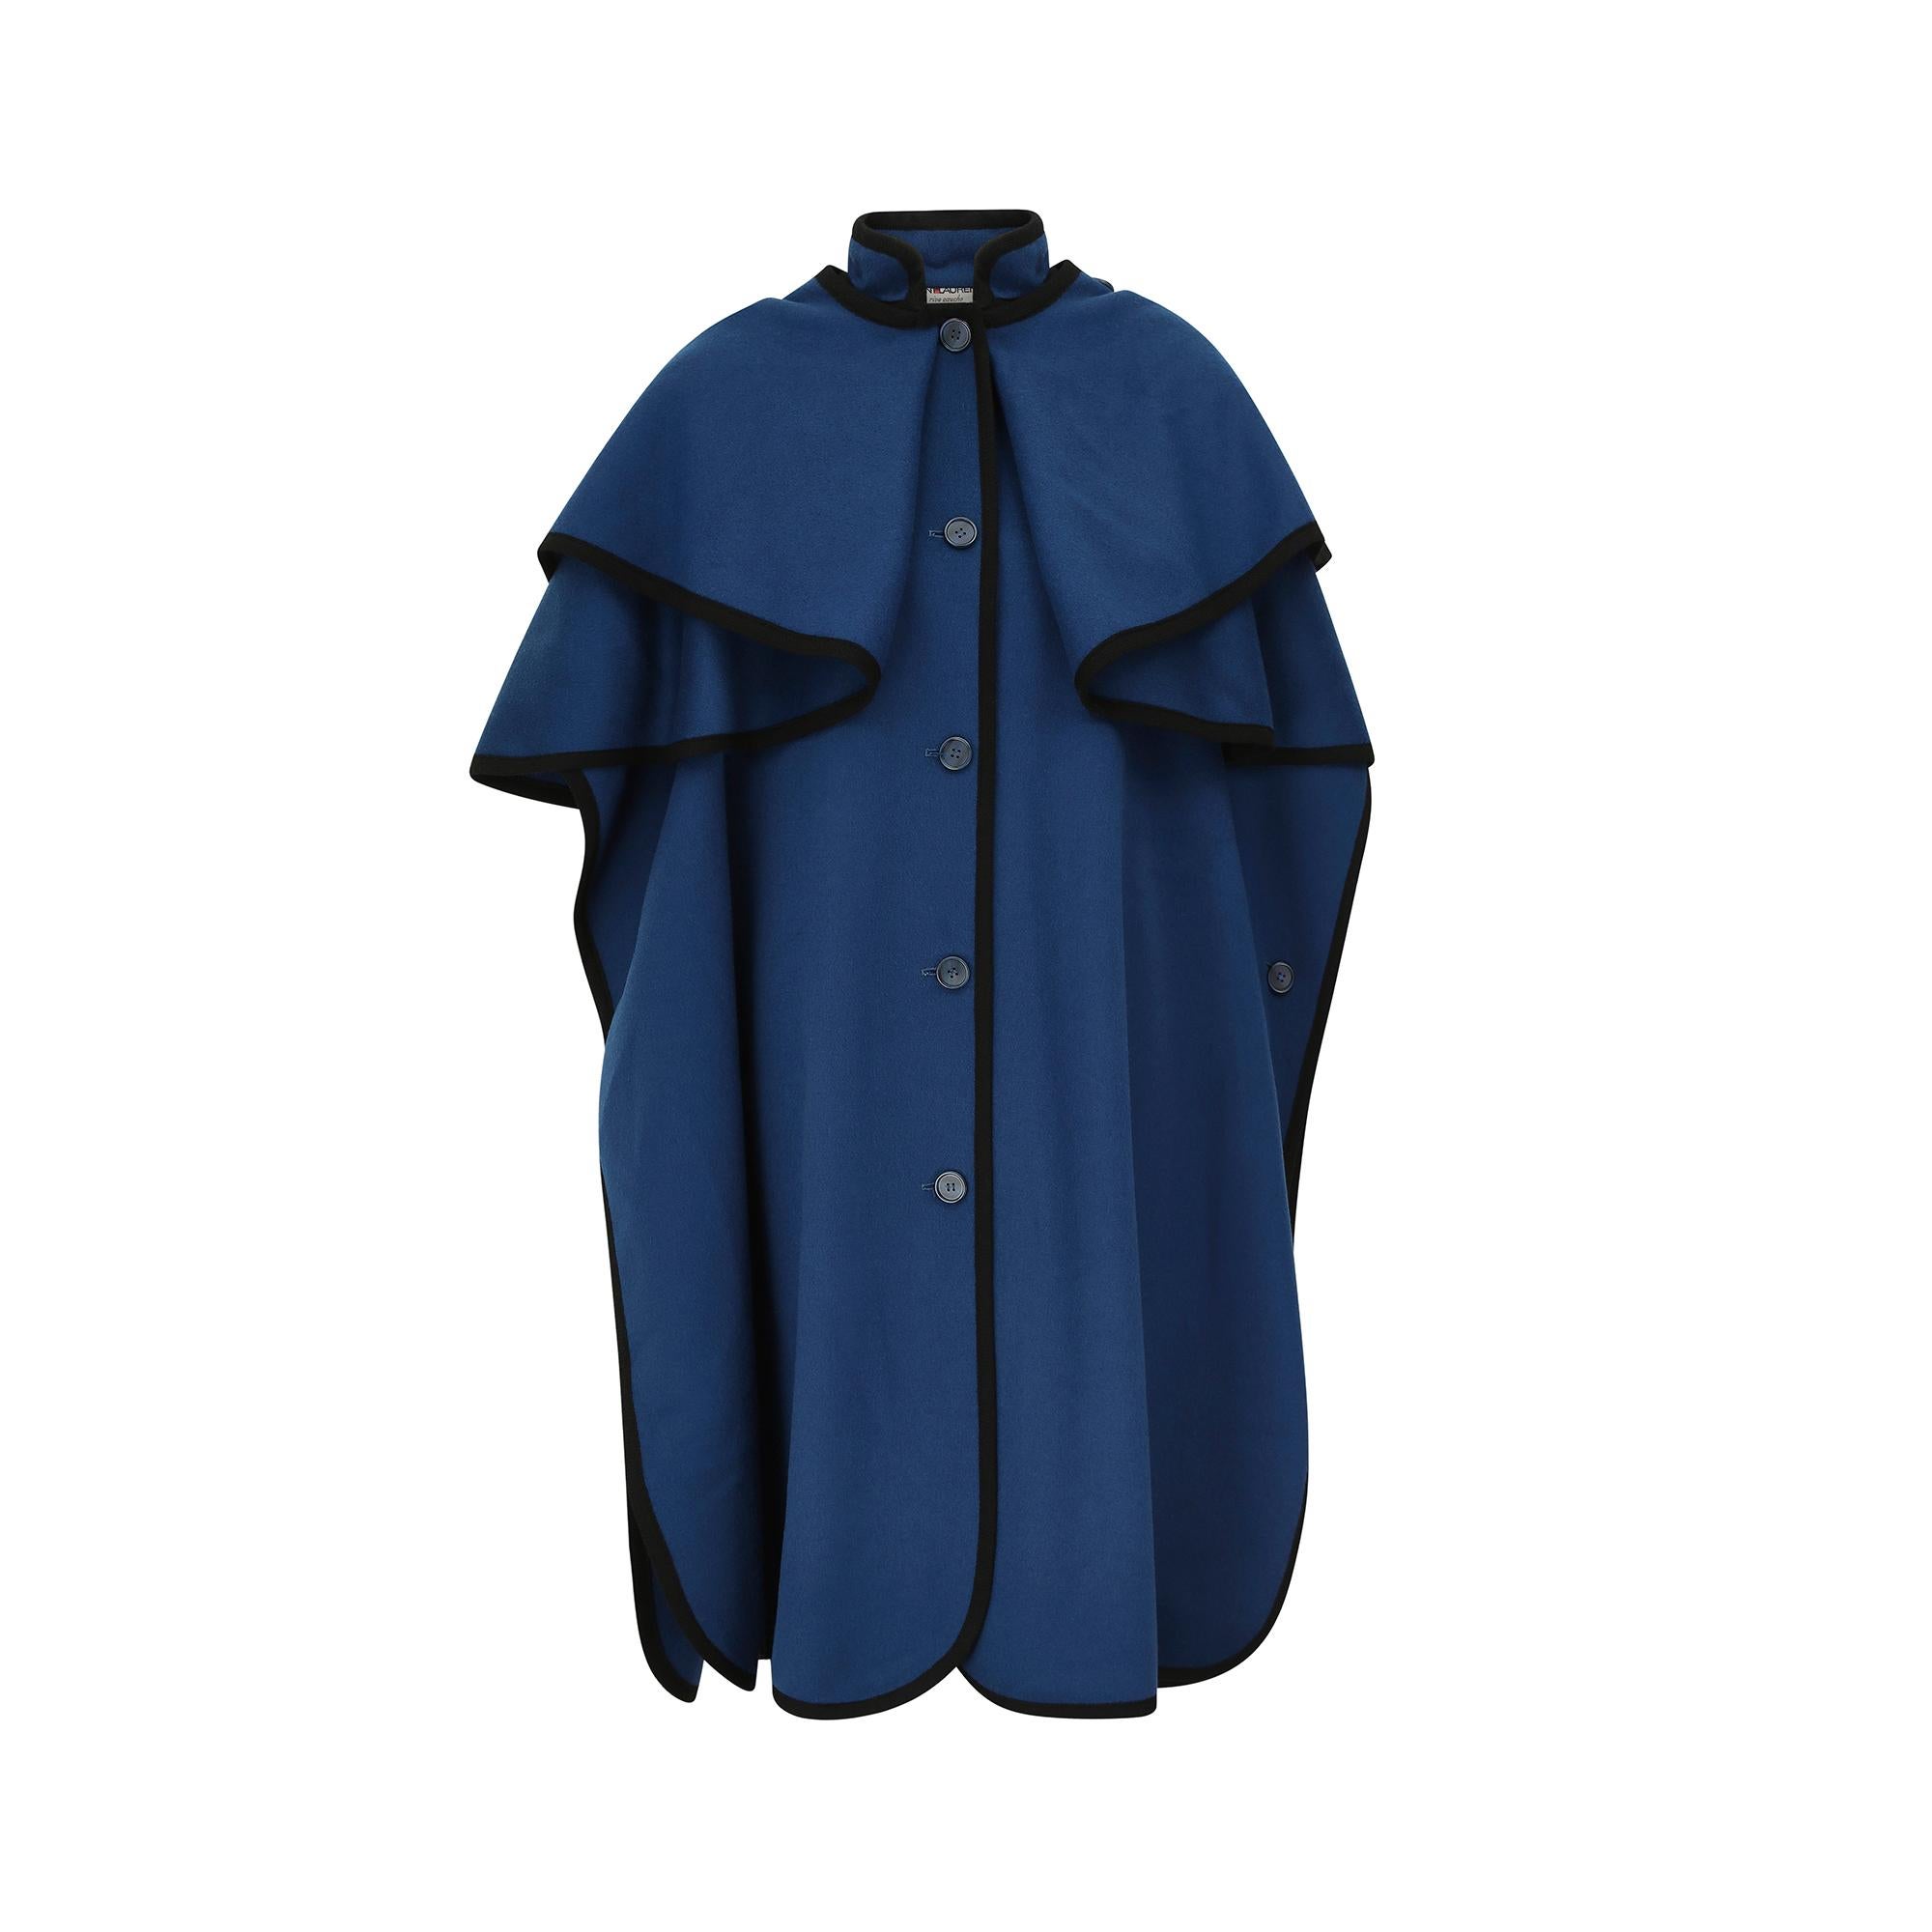 This magnificent A/W 1976 Yves Saint Laurent Rive Gauche peacock blue wool cape excites drama and style and can be worn two ways, varying the impact of the piece. The 100% soft wool felt is artfully fashioned to create a double tier tunic cape